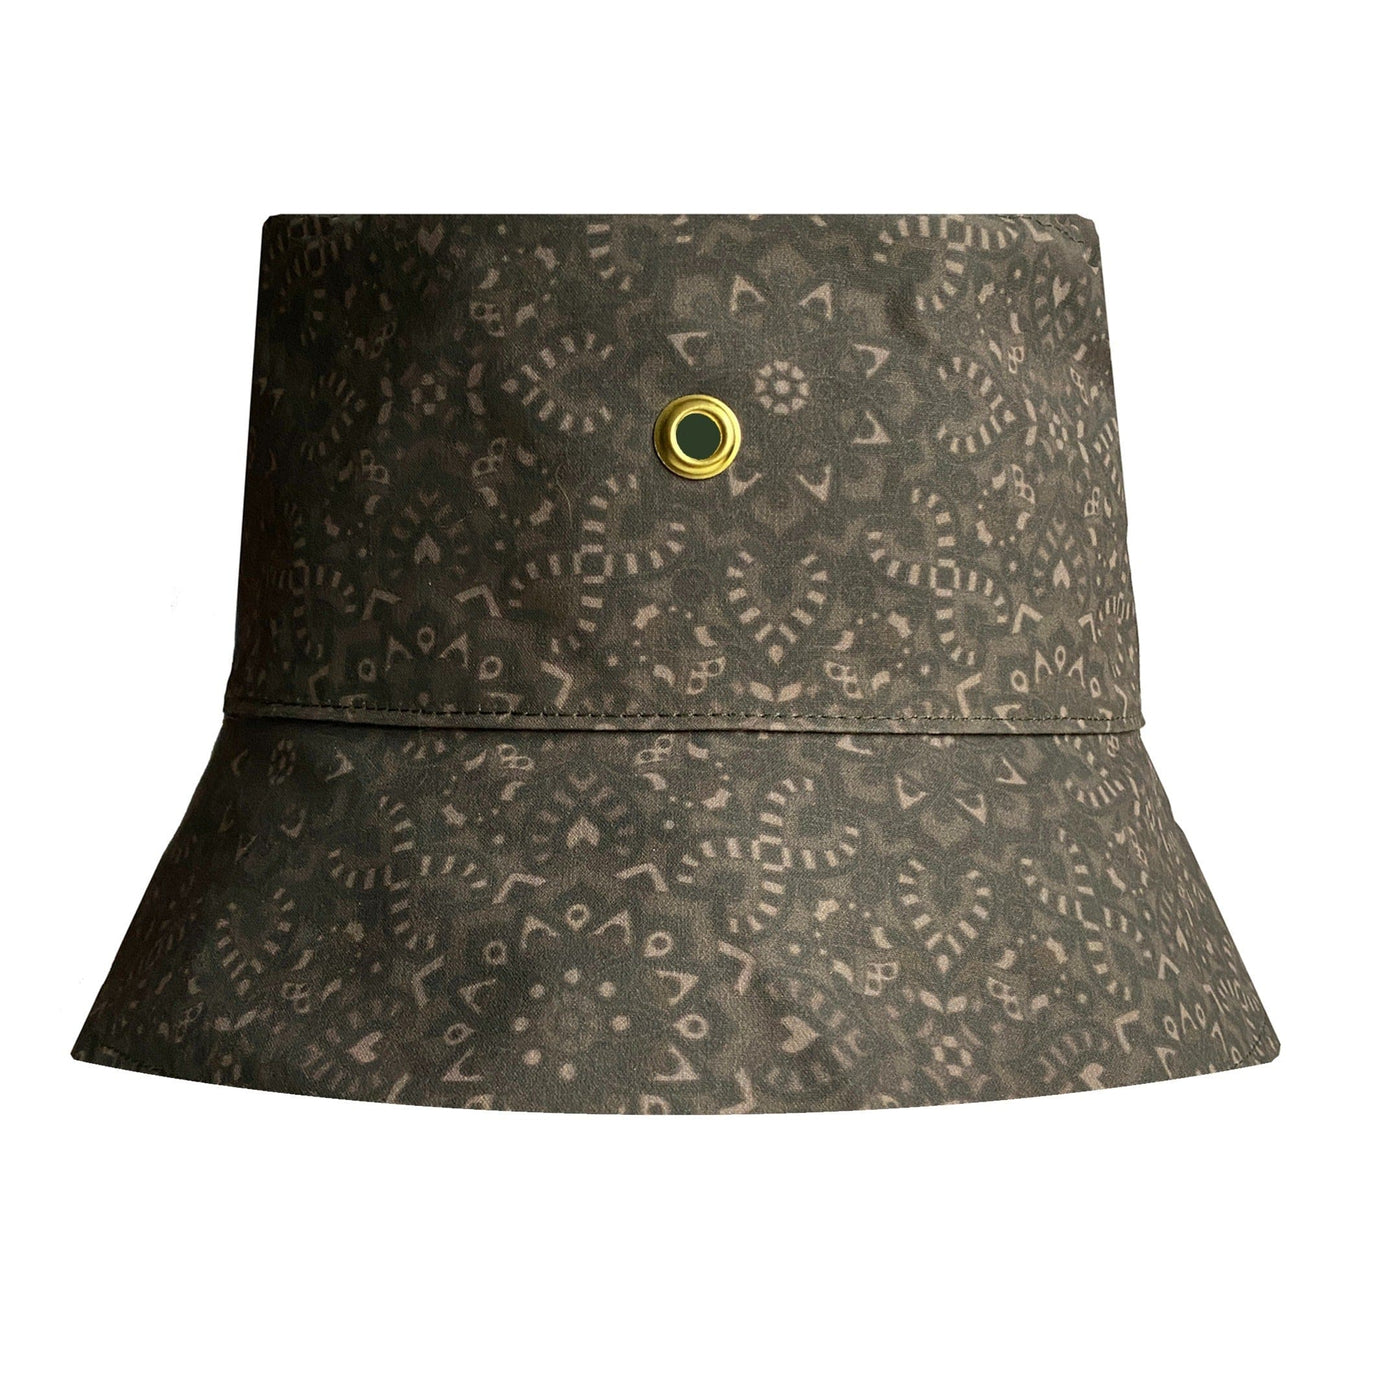 FELLER Hats Taupe Moroccan / M Blaine Waxed Cotton Bucket Hat